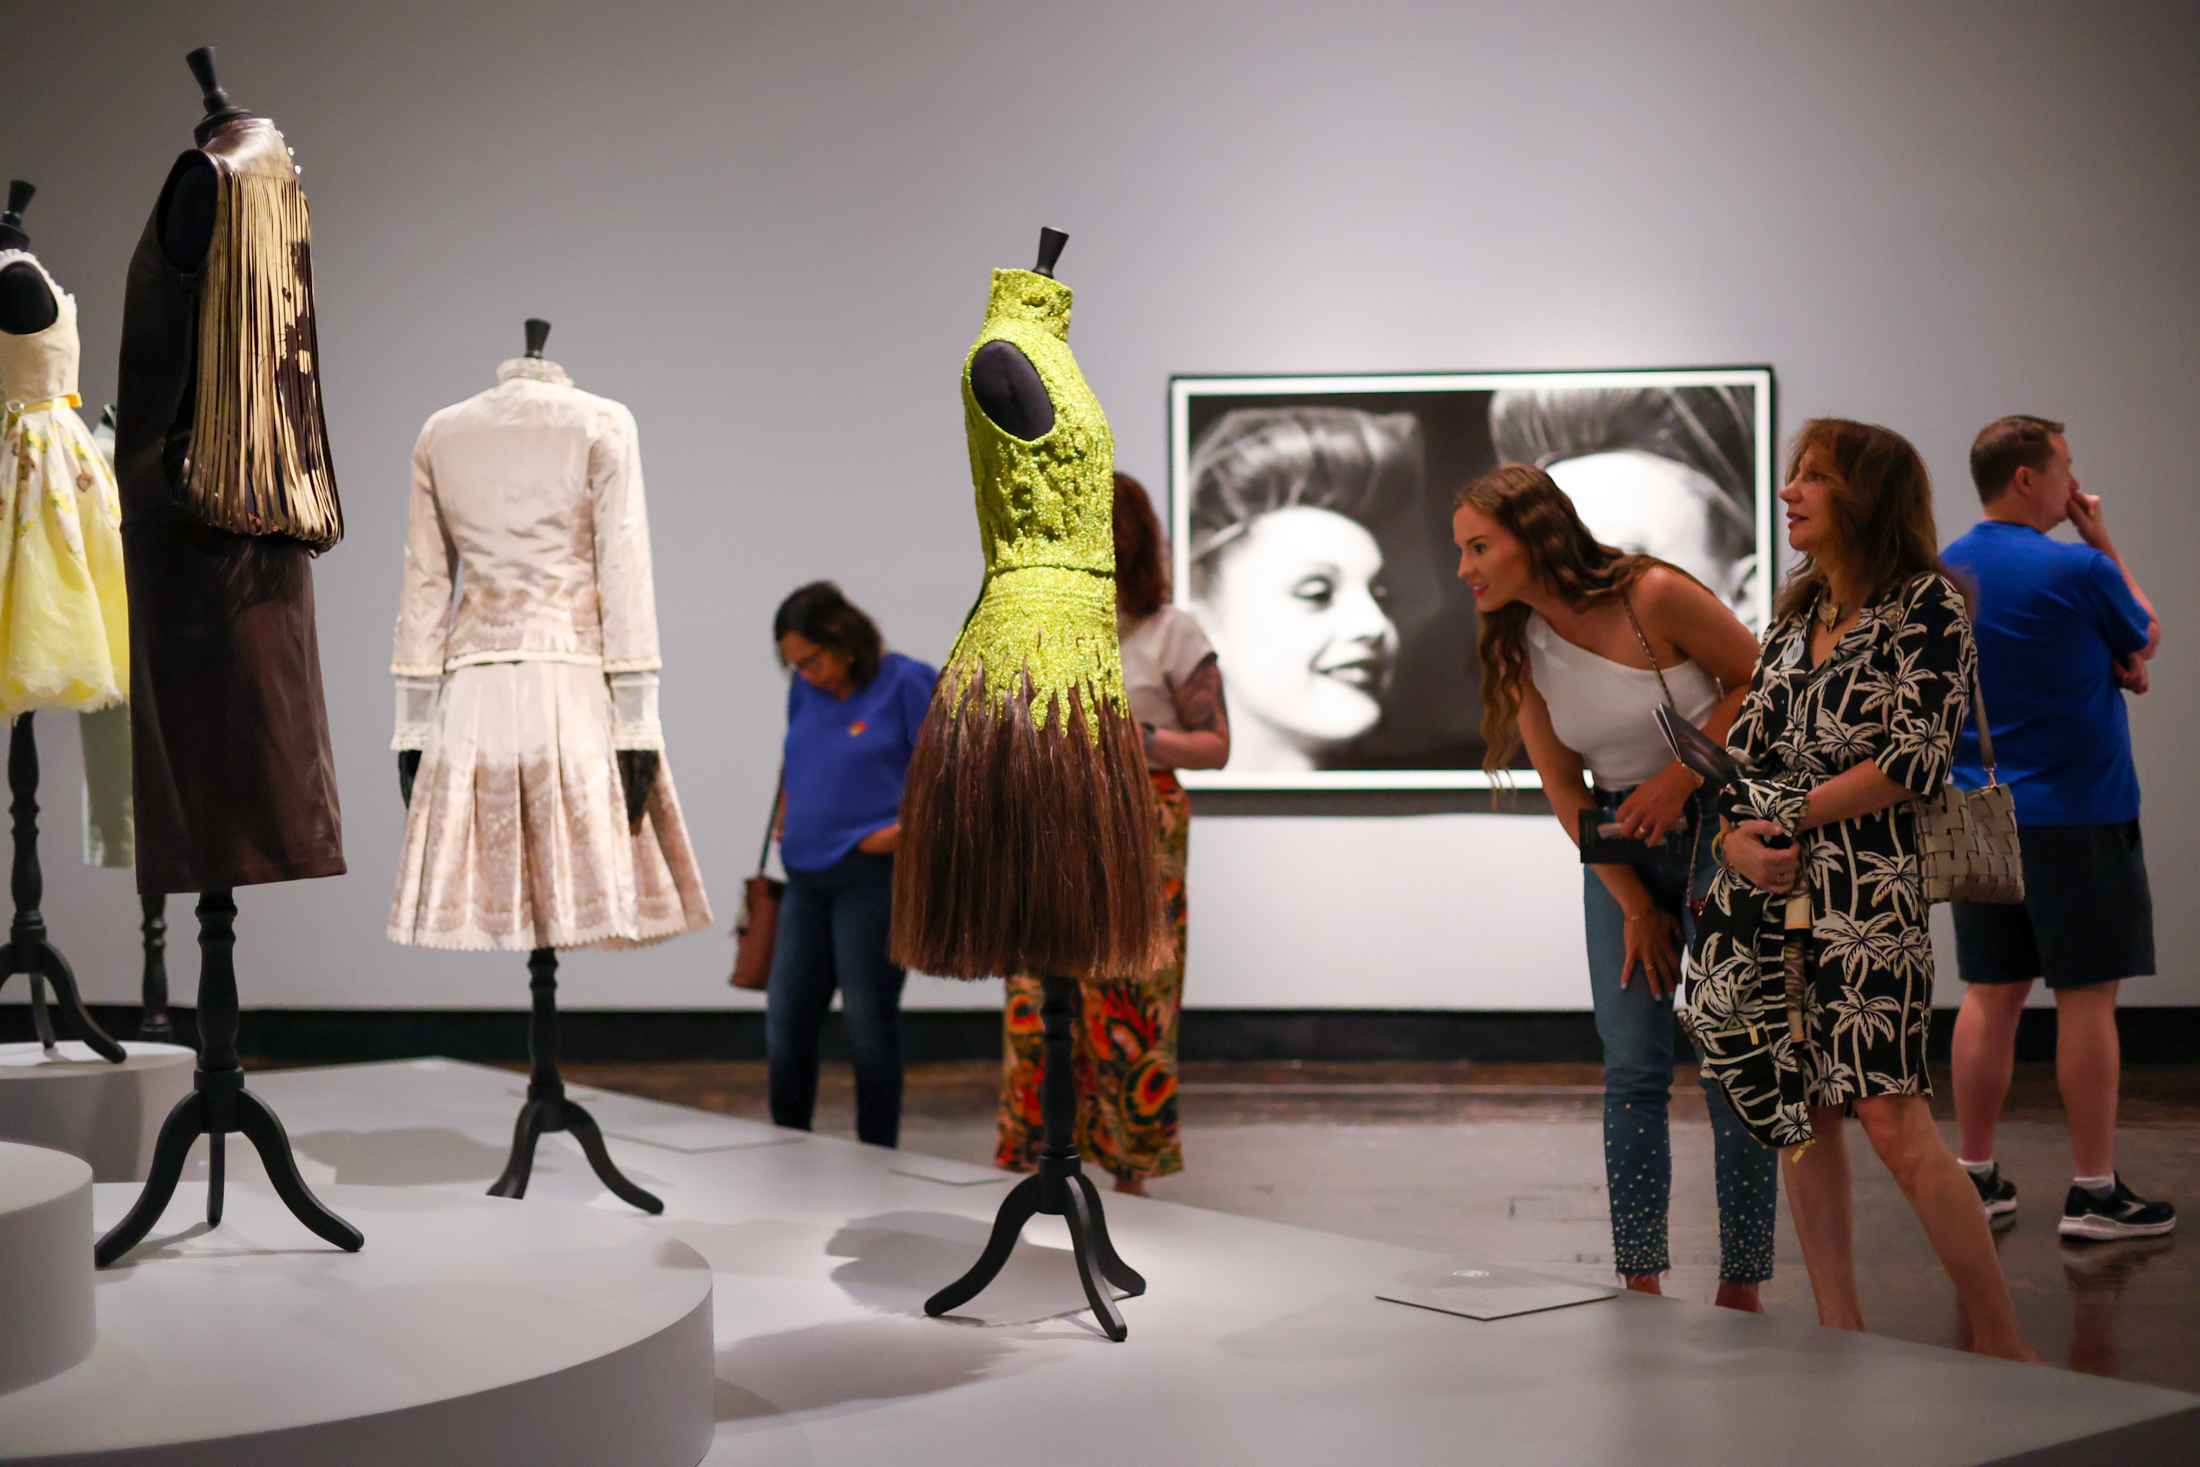 Two women looking closely at dresses on display in a gallery